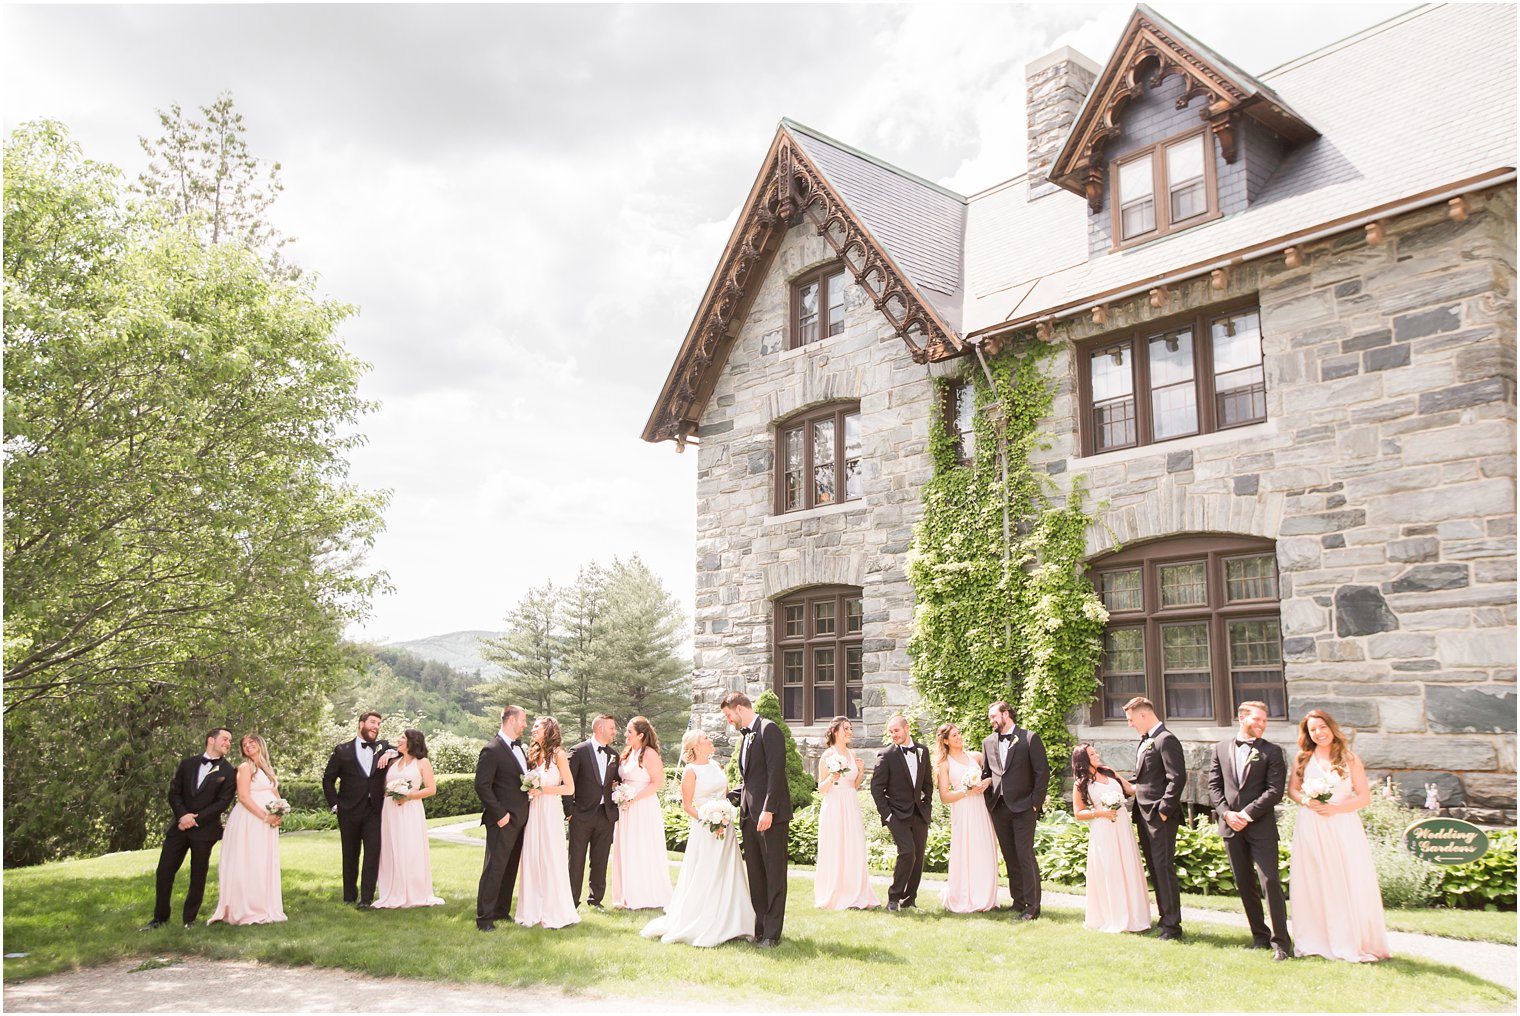 Bridal party photo | Castle Hill Inn Resort in Ludlow, Vermont